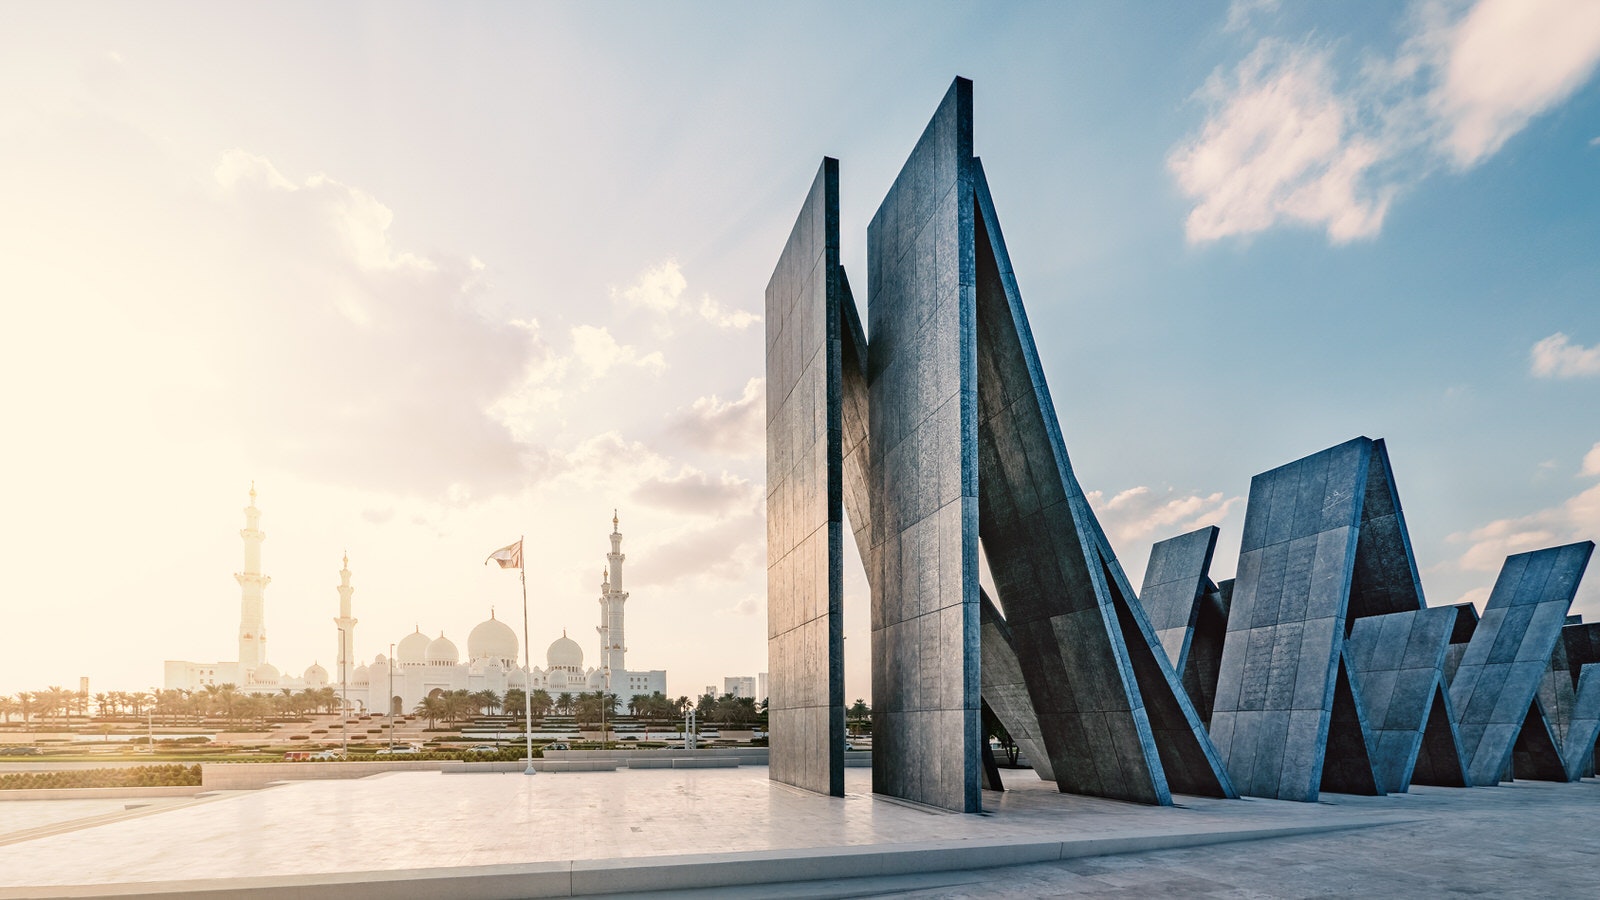 Panoramic image of Wahat Al Karama (Oasis of Dignity), a permanent memorial for the country's martyrs, with Sheikh Zayed Grand Mosque in the distance.